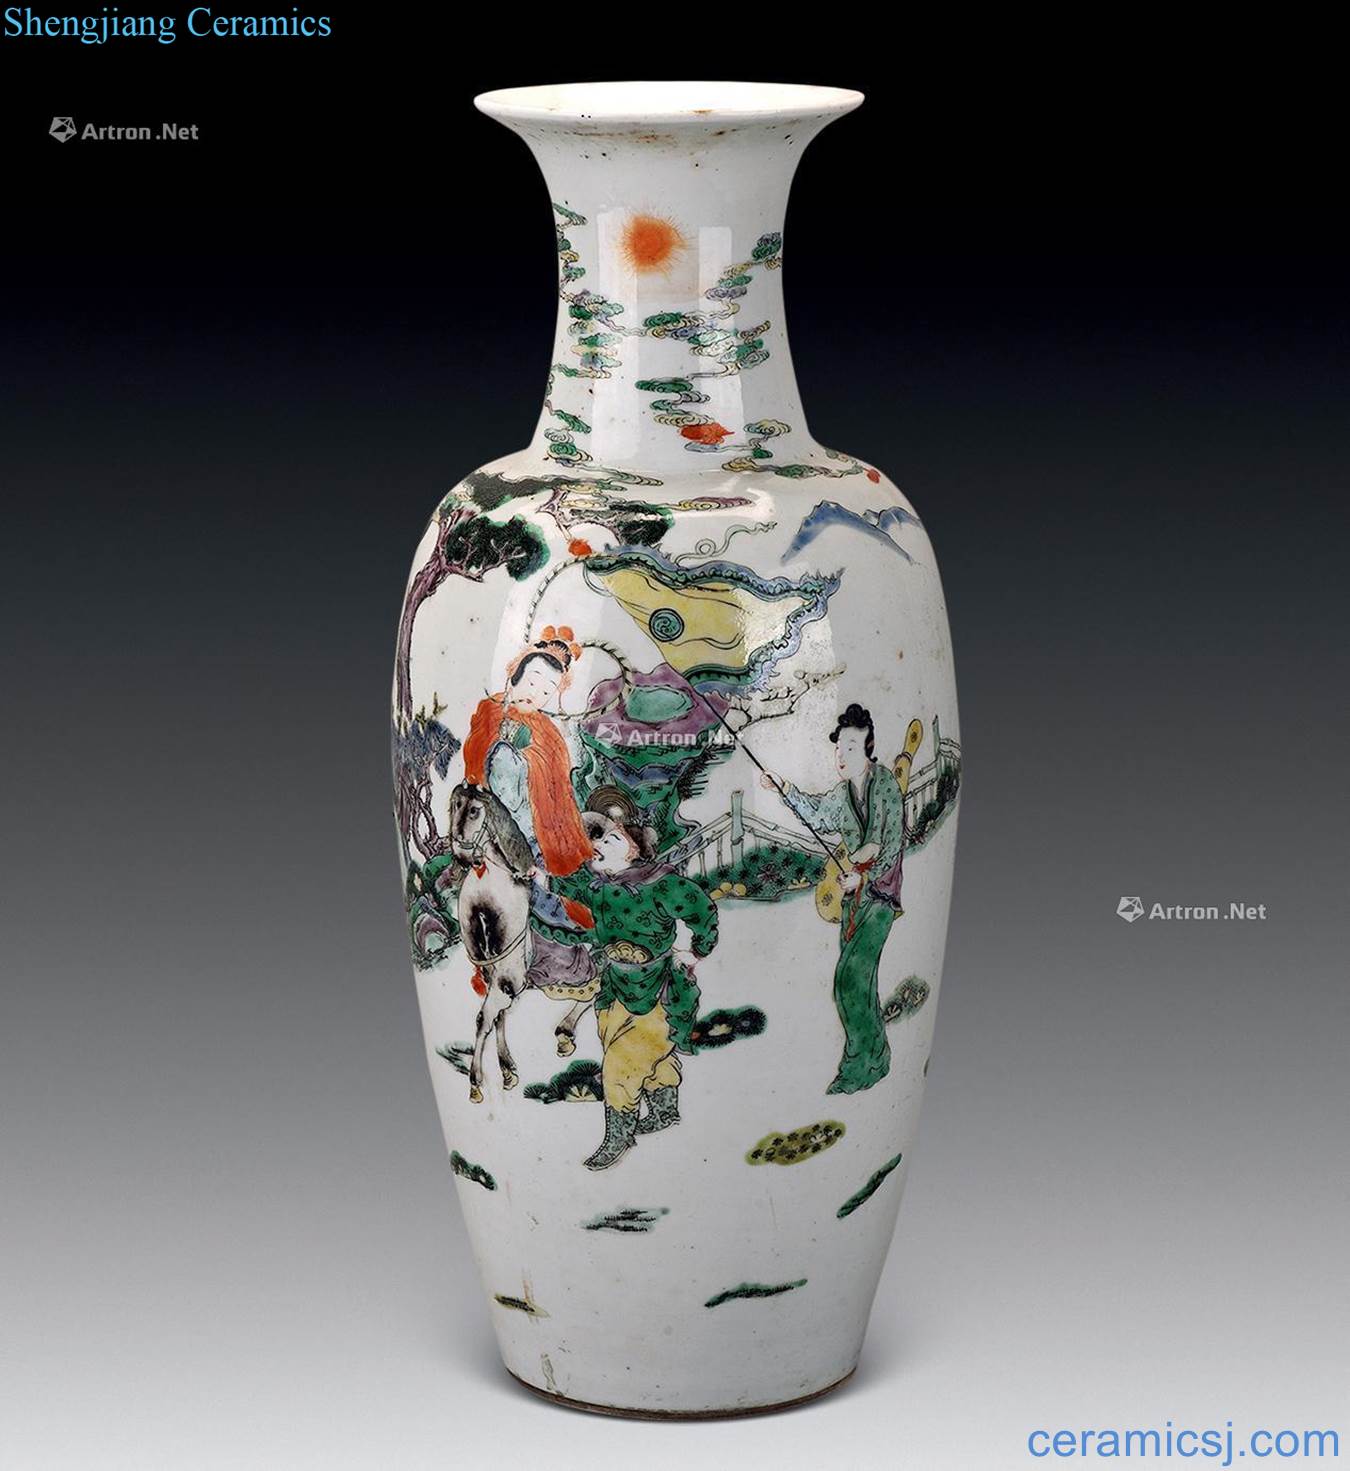 The colorful traditional Chinese goddess of mercy bottle